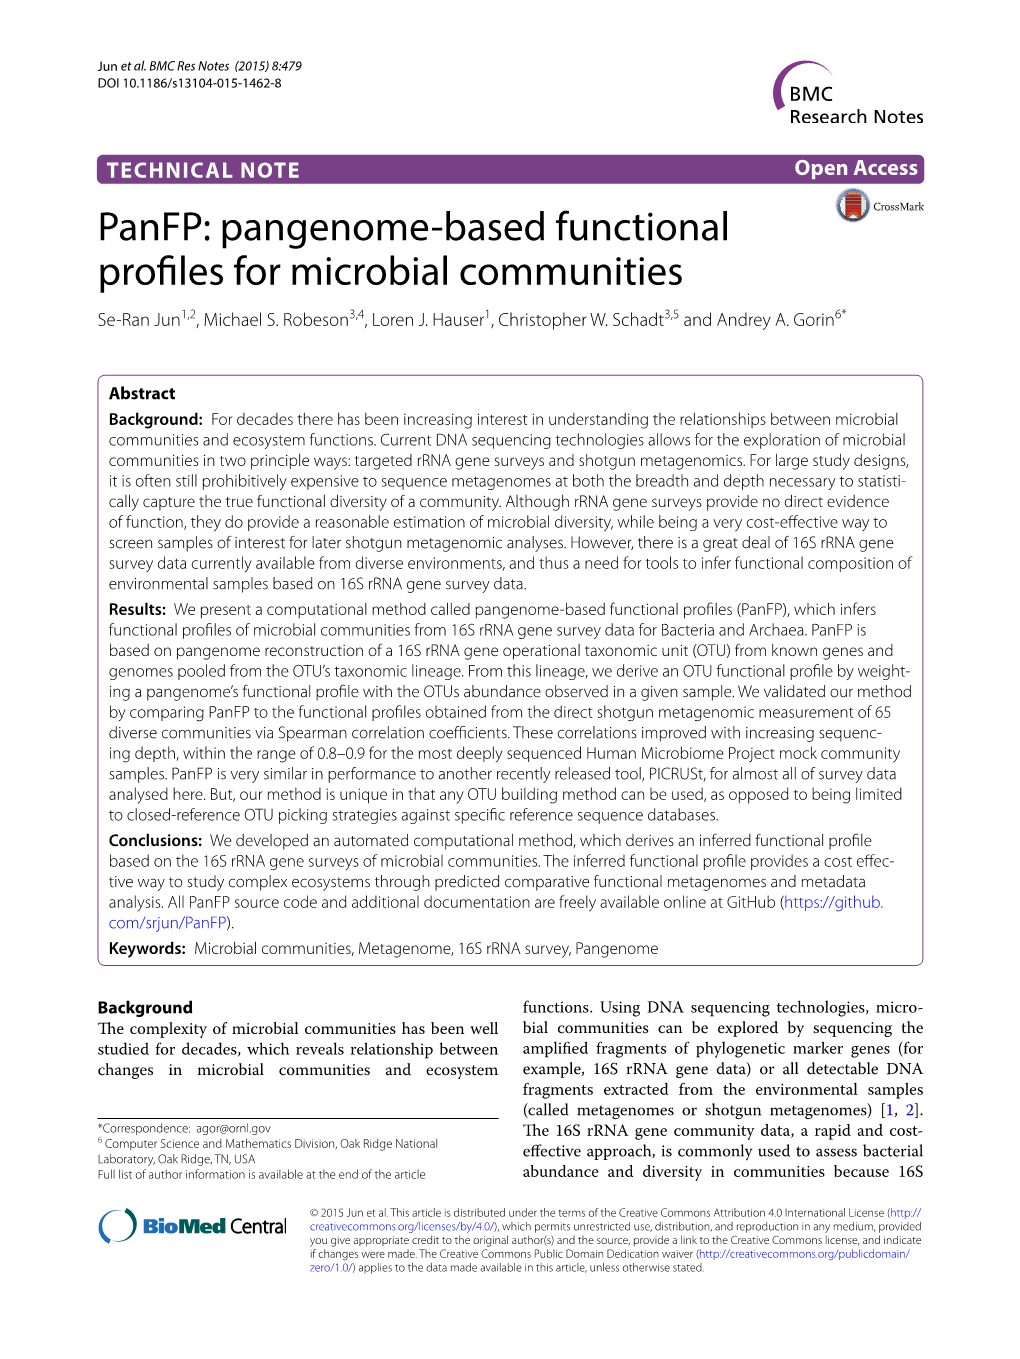 Panfp: Pangenome-Based Functional Profiles for Microbial Communities